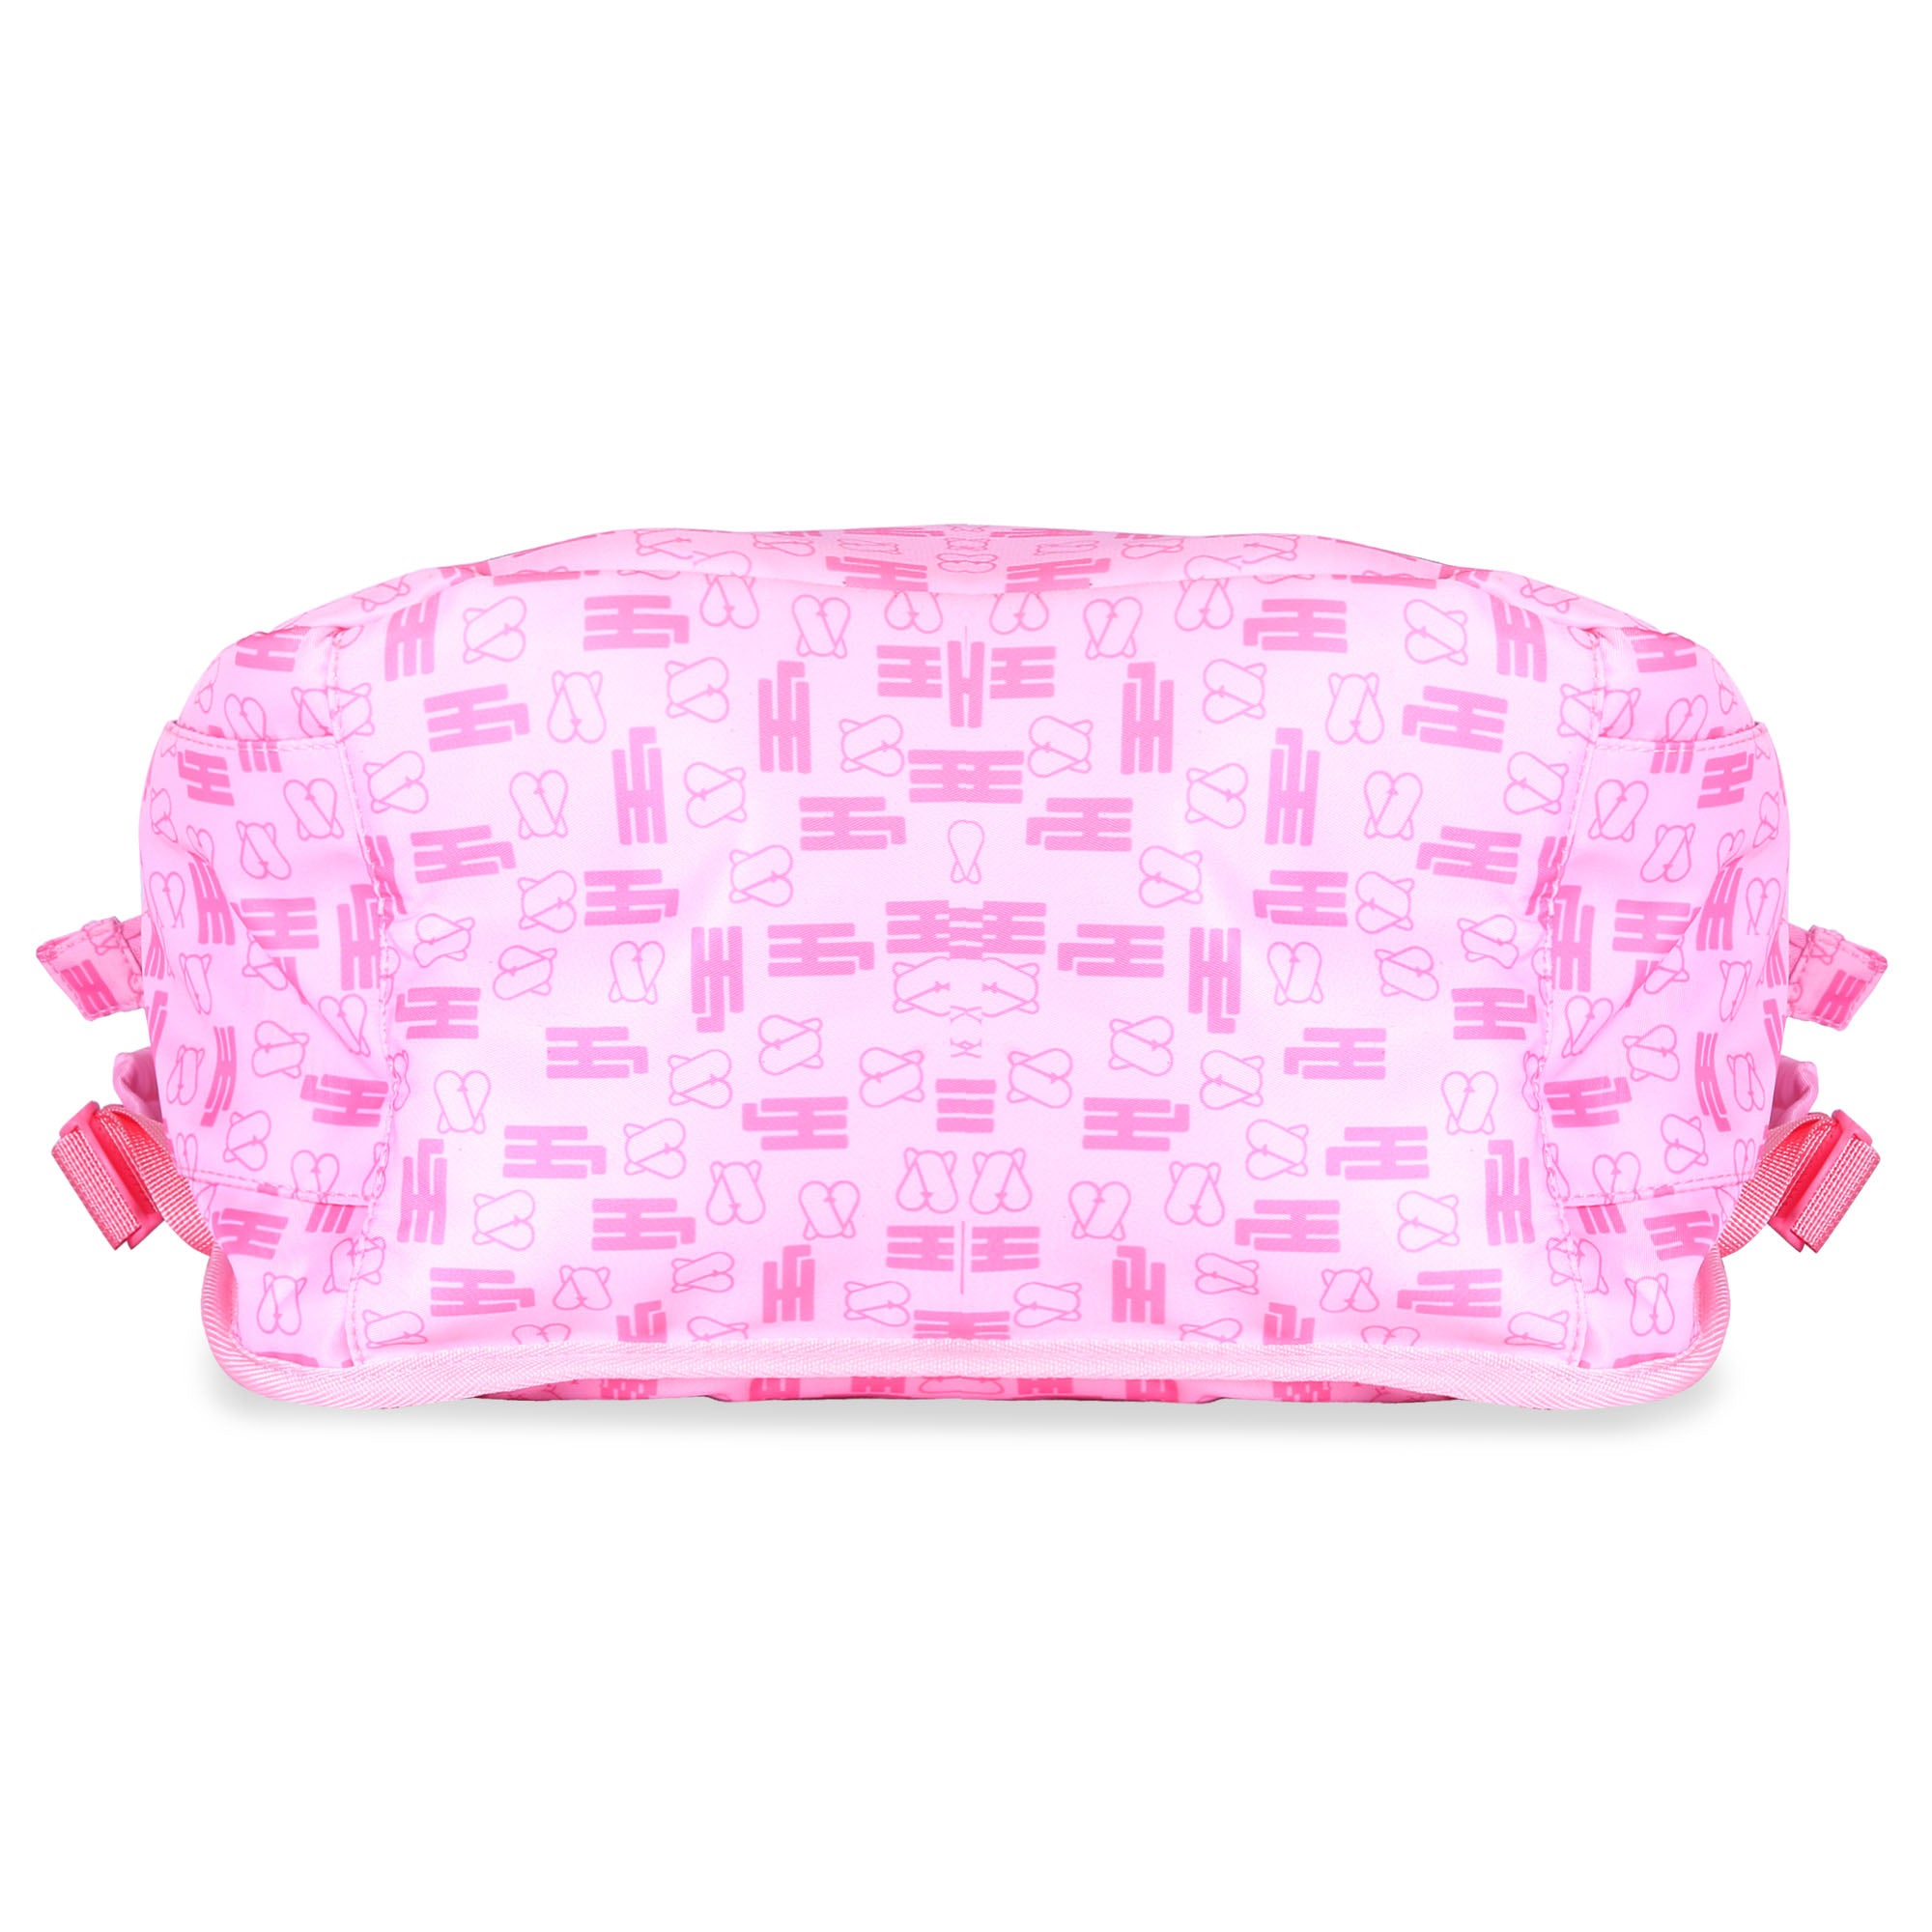 Hamster London Classic Changing Bag Pink